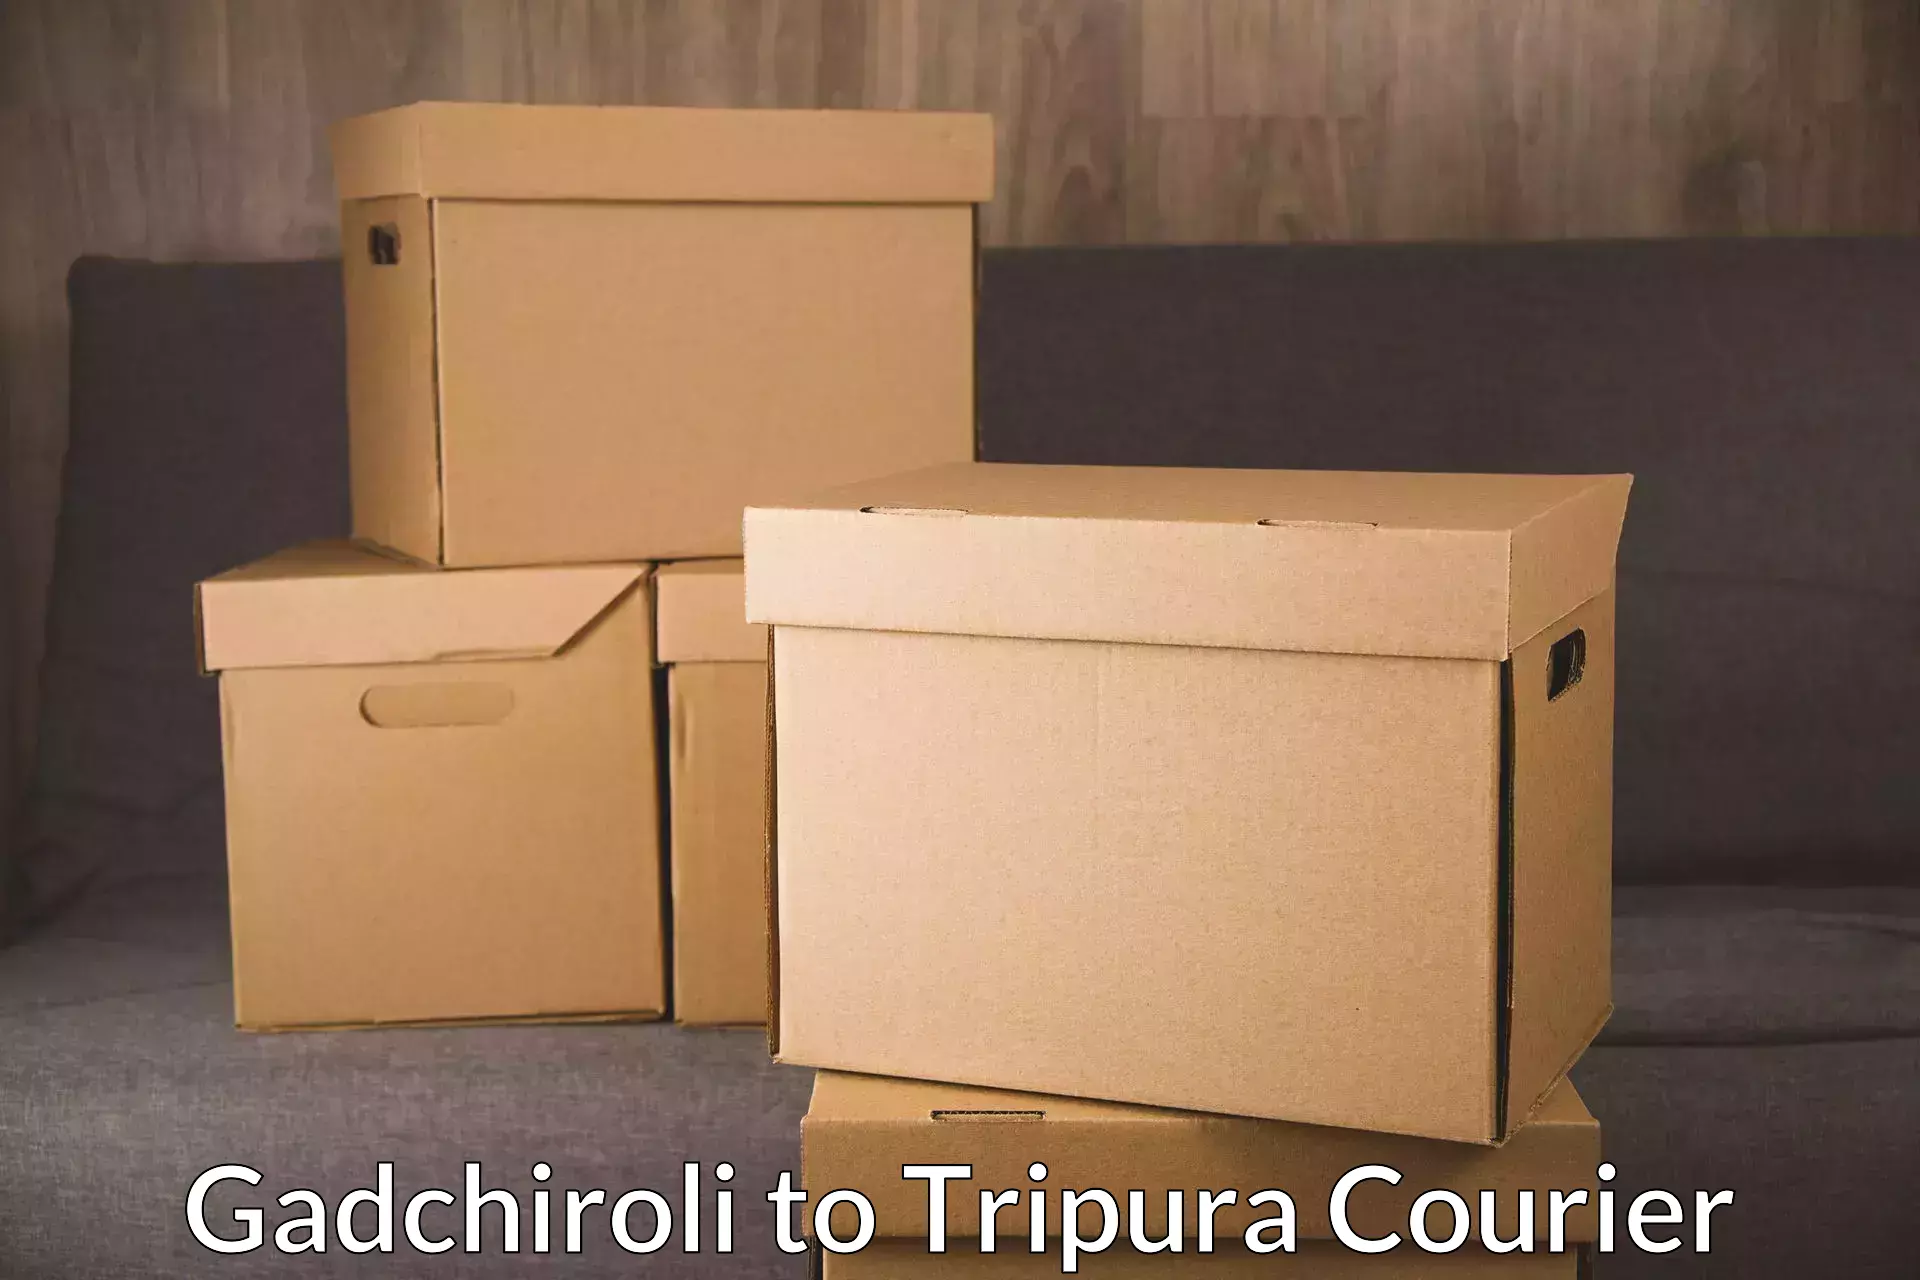 Overnight delivery services Gadchiroli to Udaipur Tripura